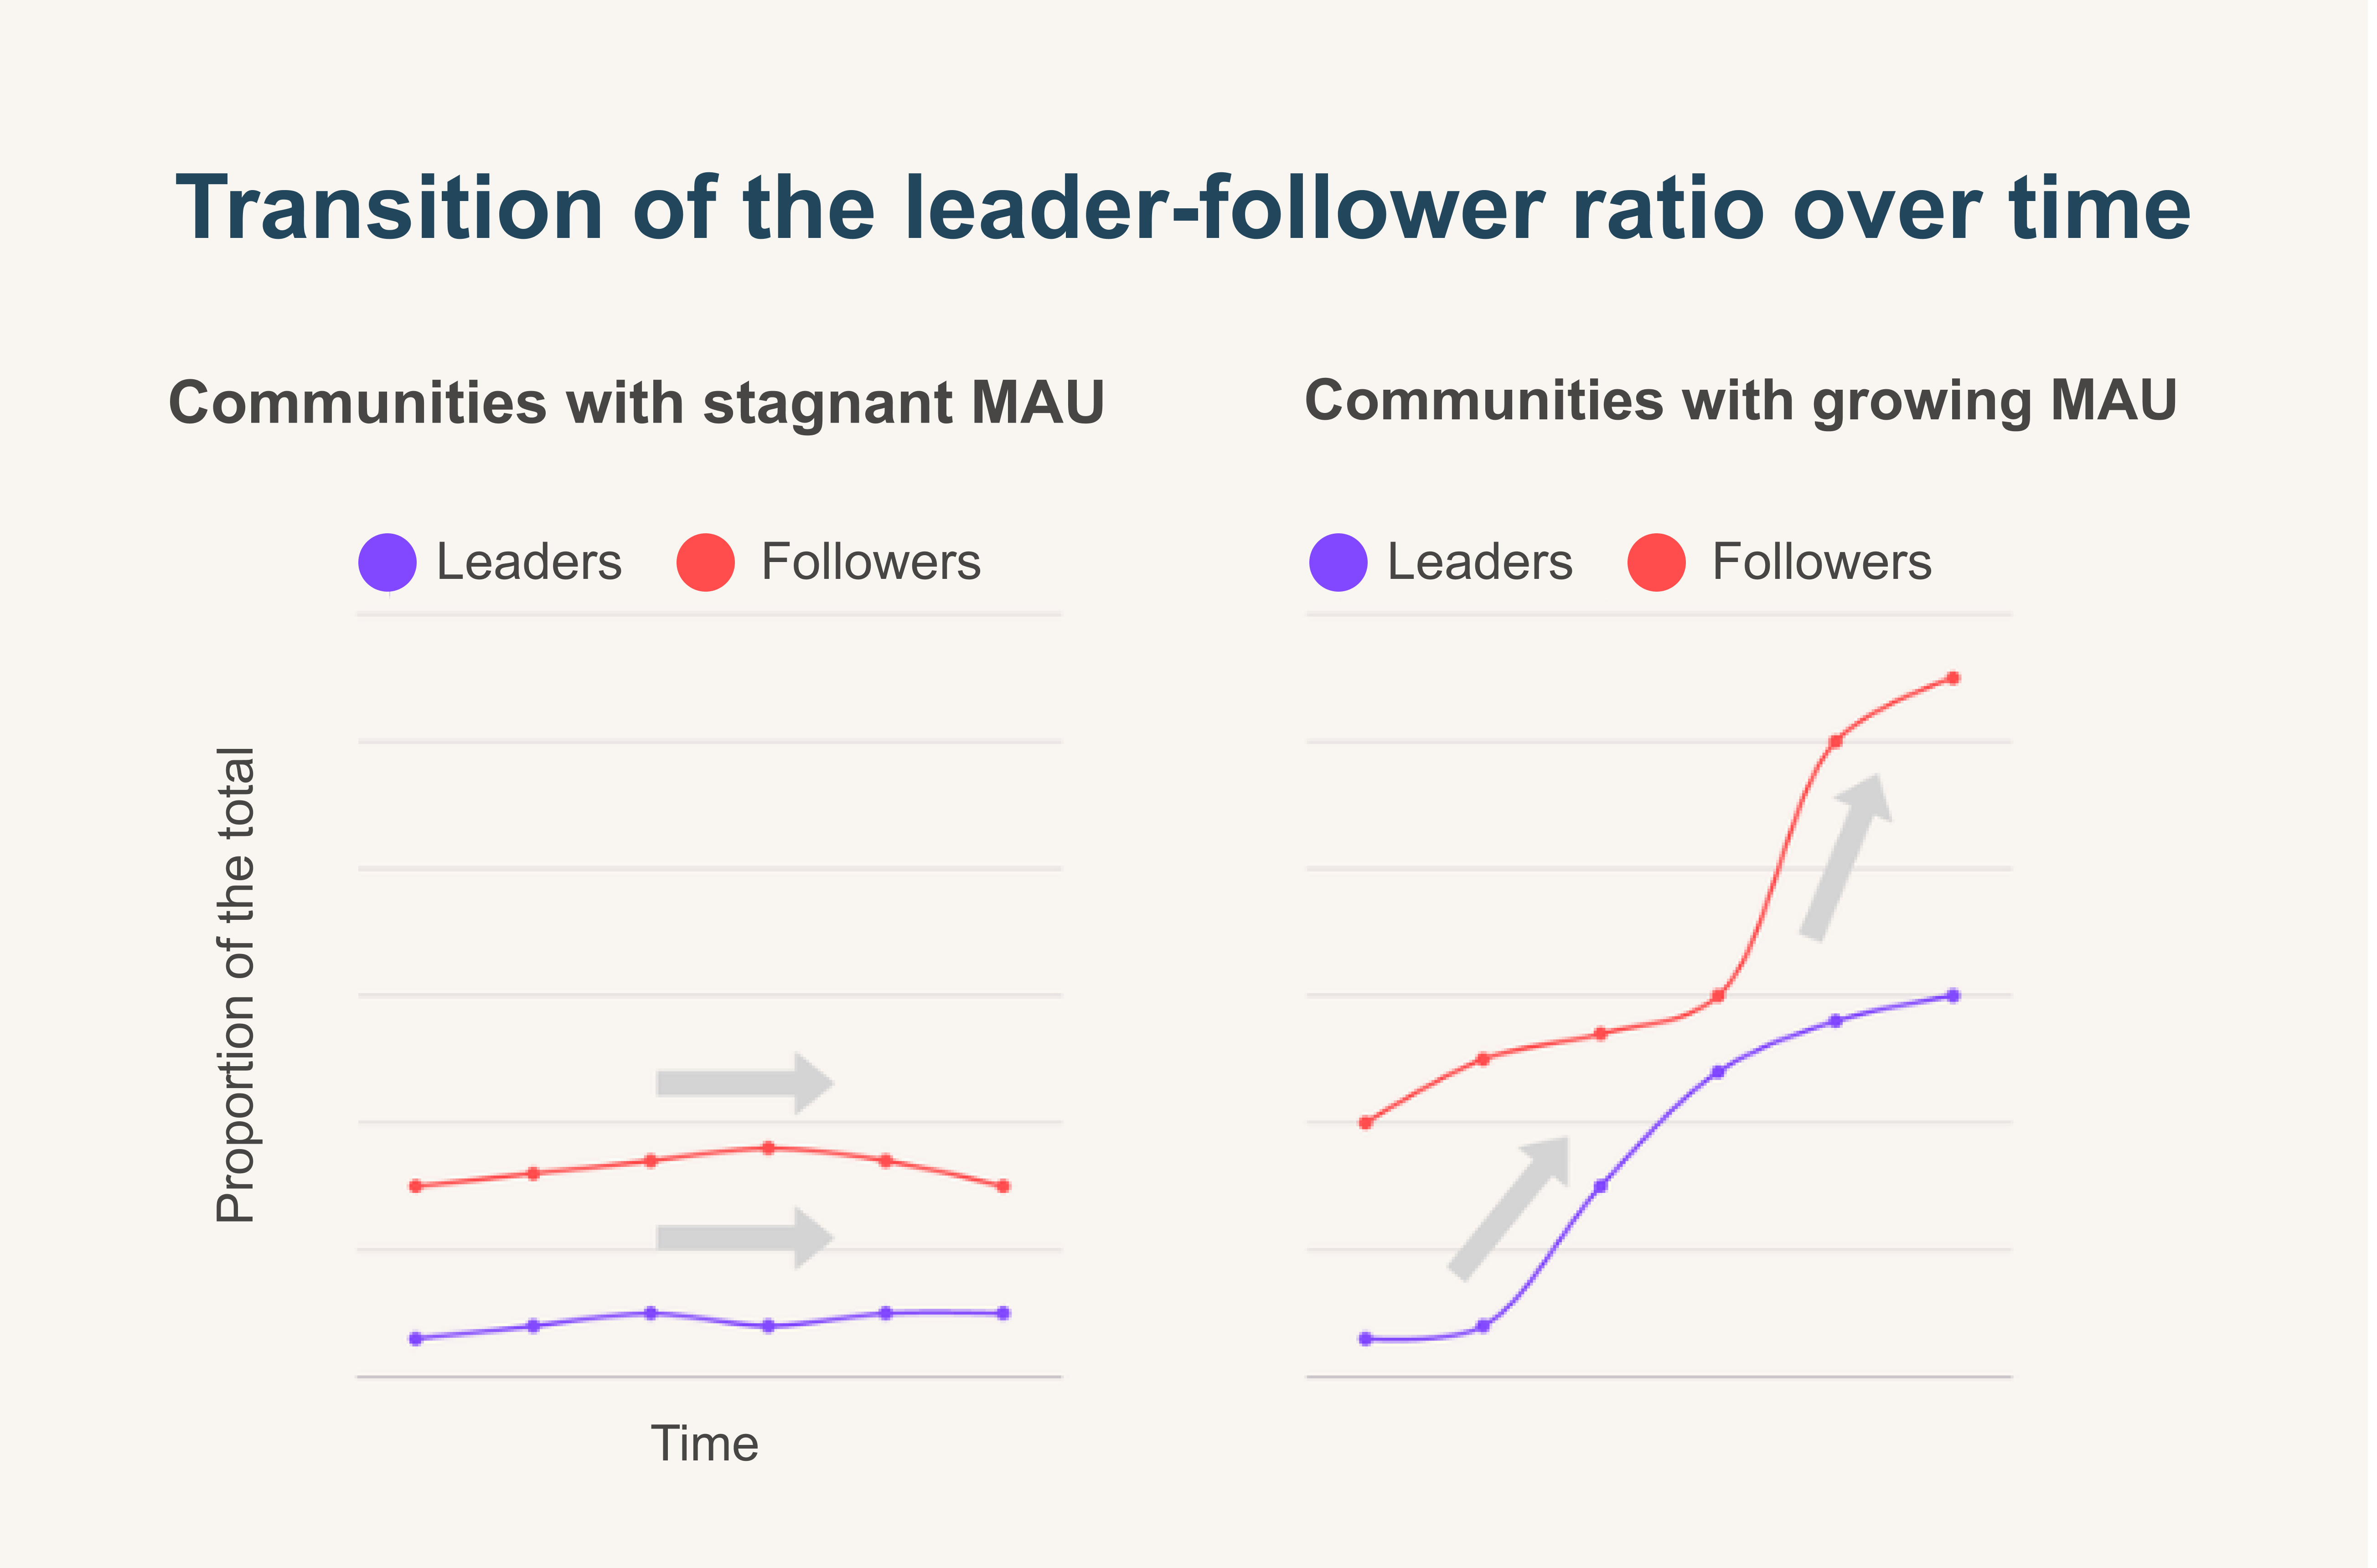 The number of active leaders begins to rise early in the inception phase of the community, which is then followed by an increase in the follower count. This sequence suggests a cascading effect, where initial leadership activity catalyzes broader community engagement and growth.